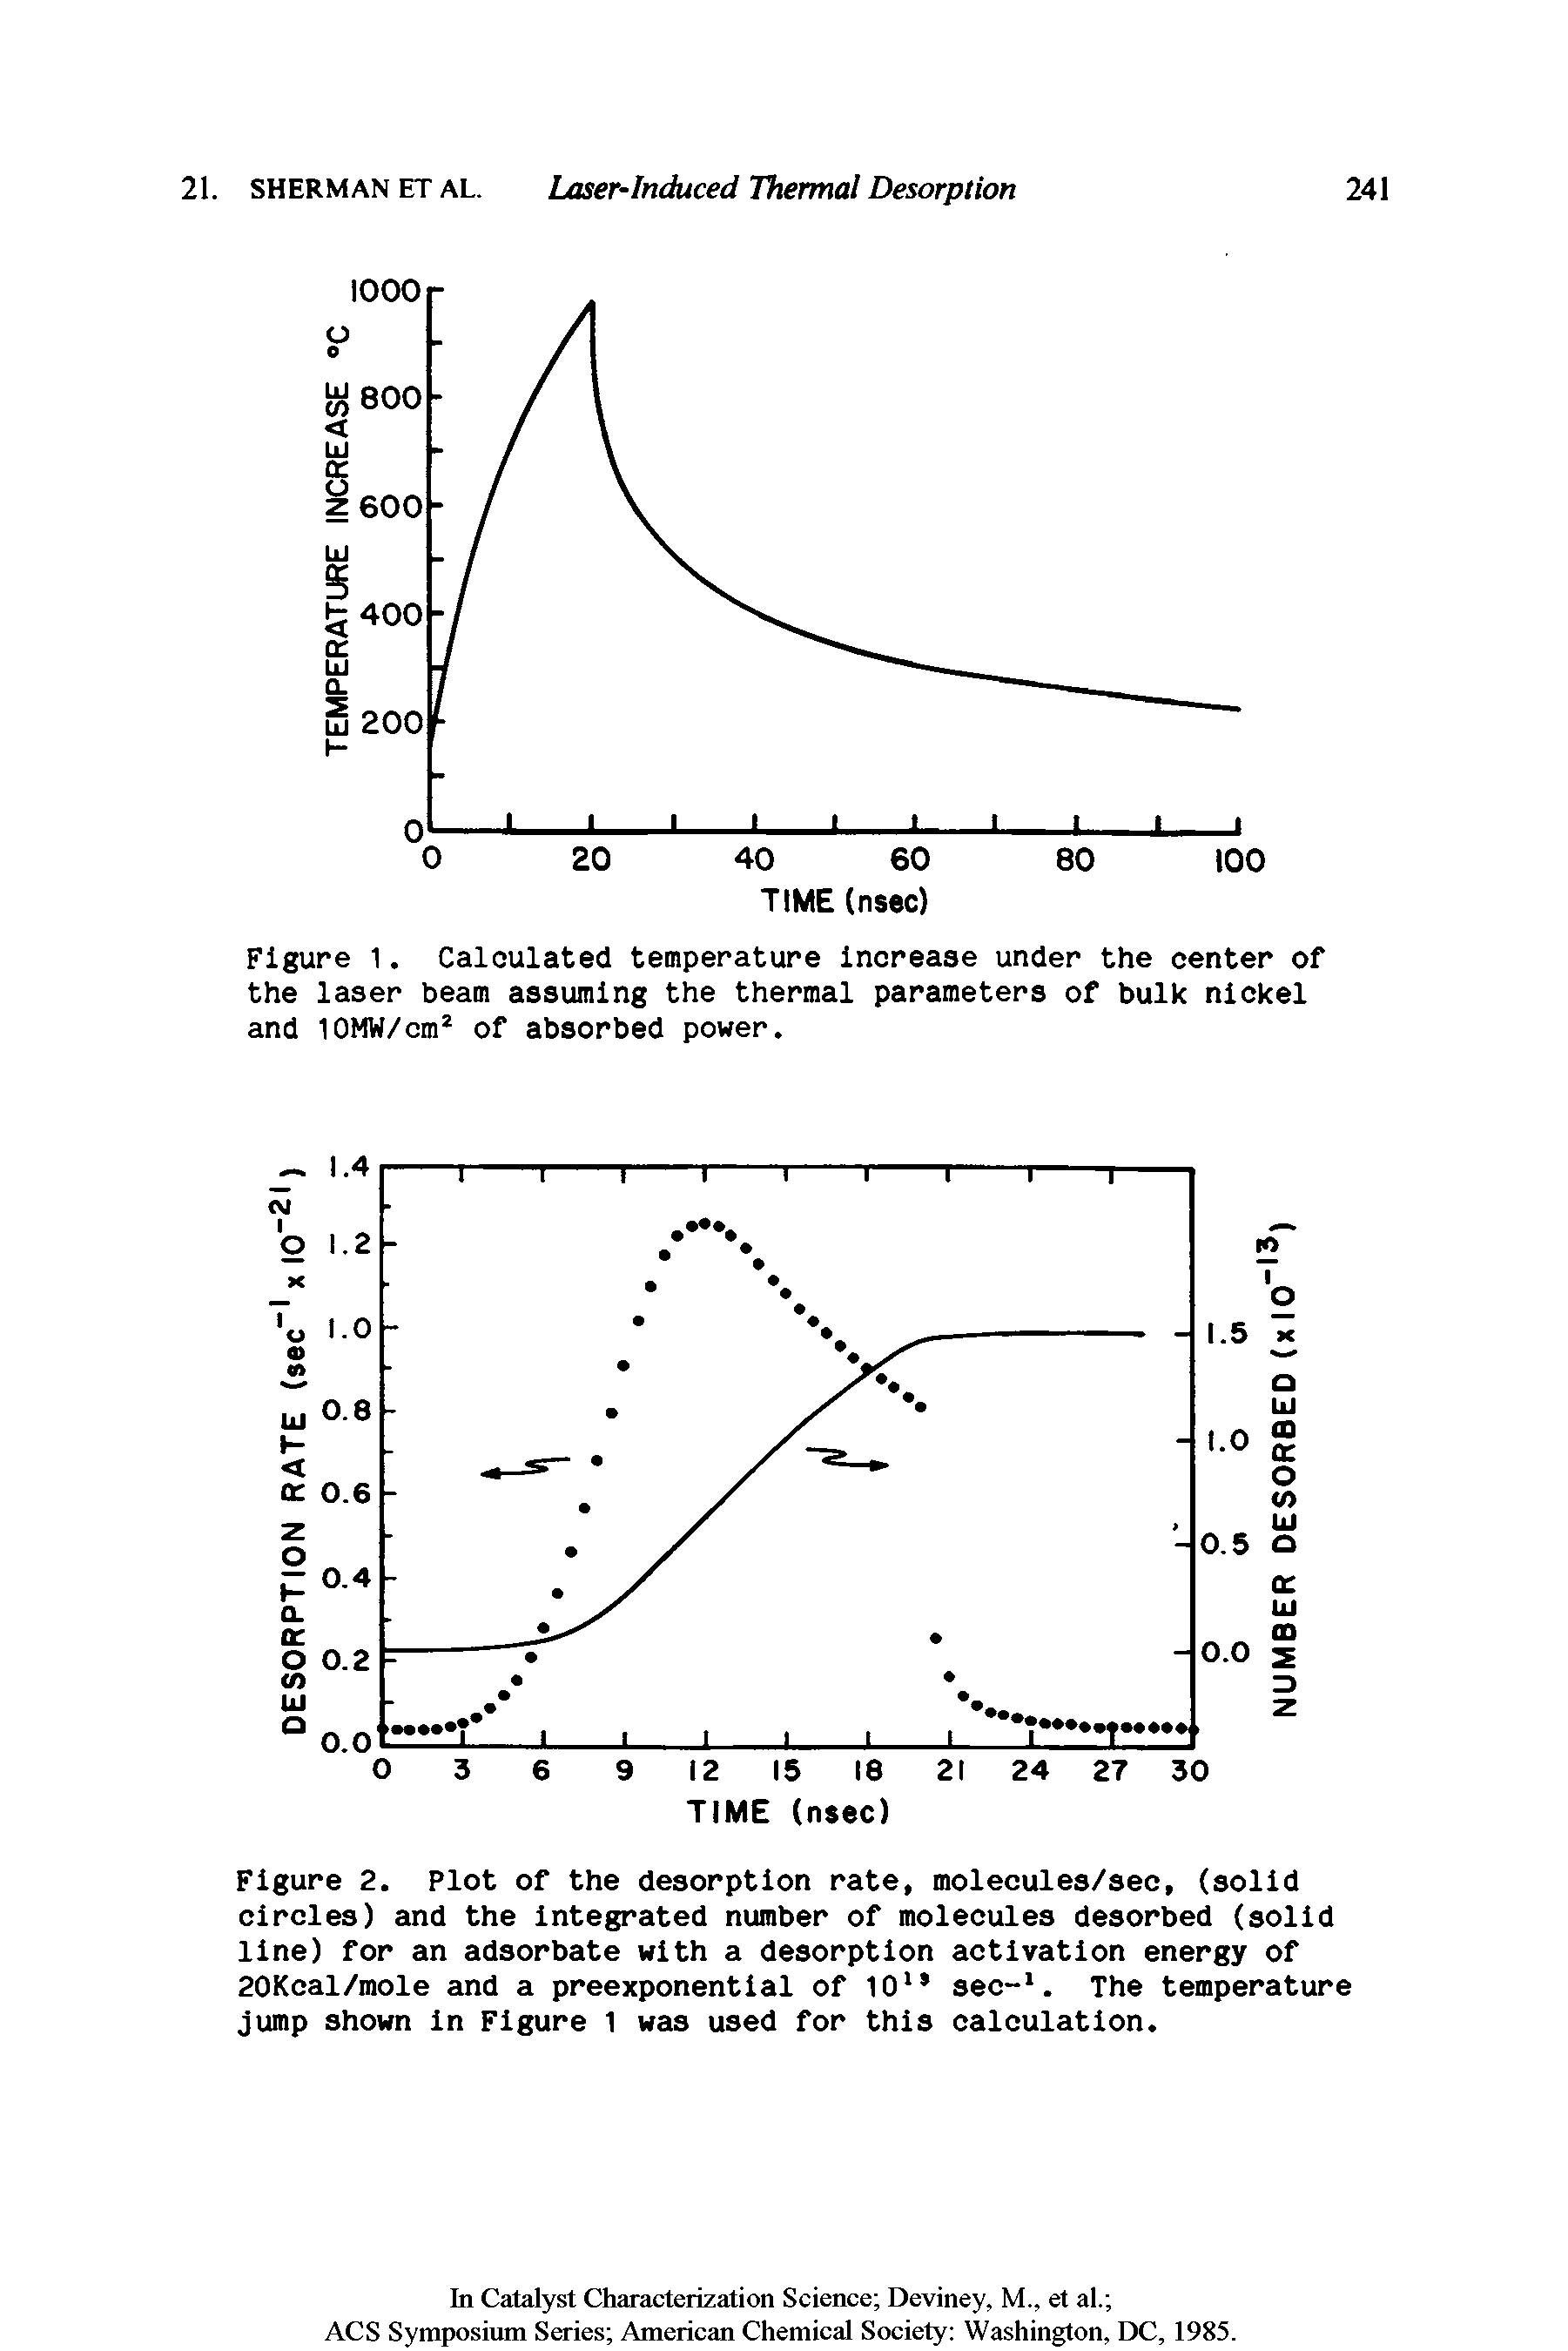 Figure 2. Plot of the desorption rate, molecules/sec, (solid circles) and the Integrated number of molecules desorbed (solid line) for an adsorbate with a desorption activation energy of 20Kcal/mole and a preexponentlal of 10 sec-. The temperature jump shown In Figure 1 was used for this calculation.